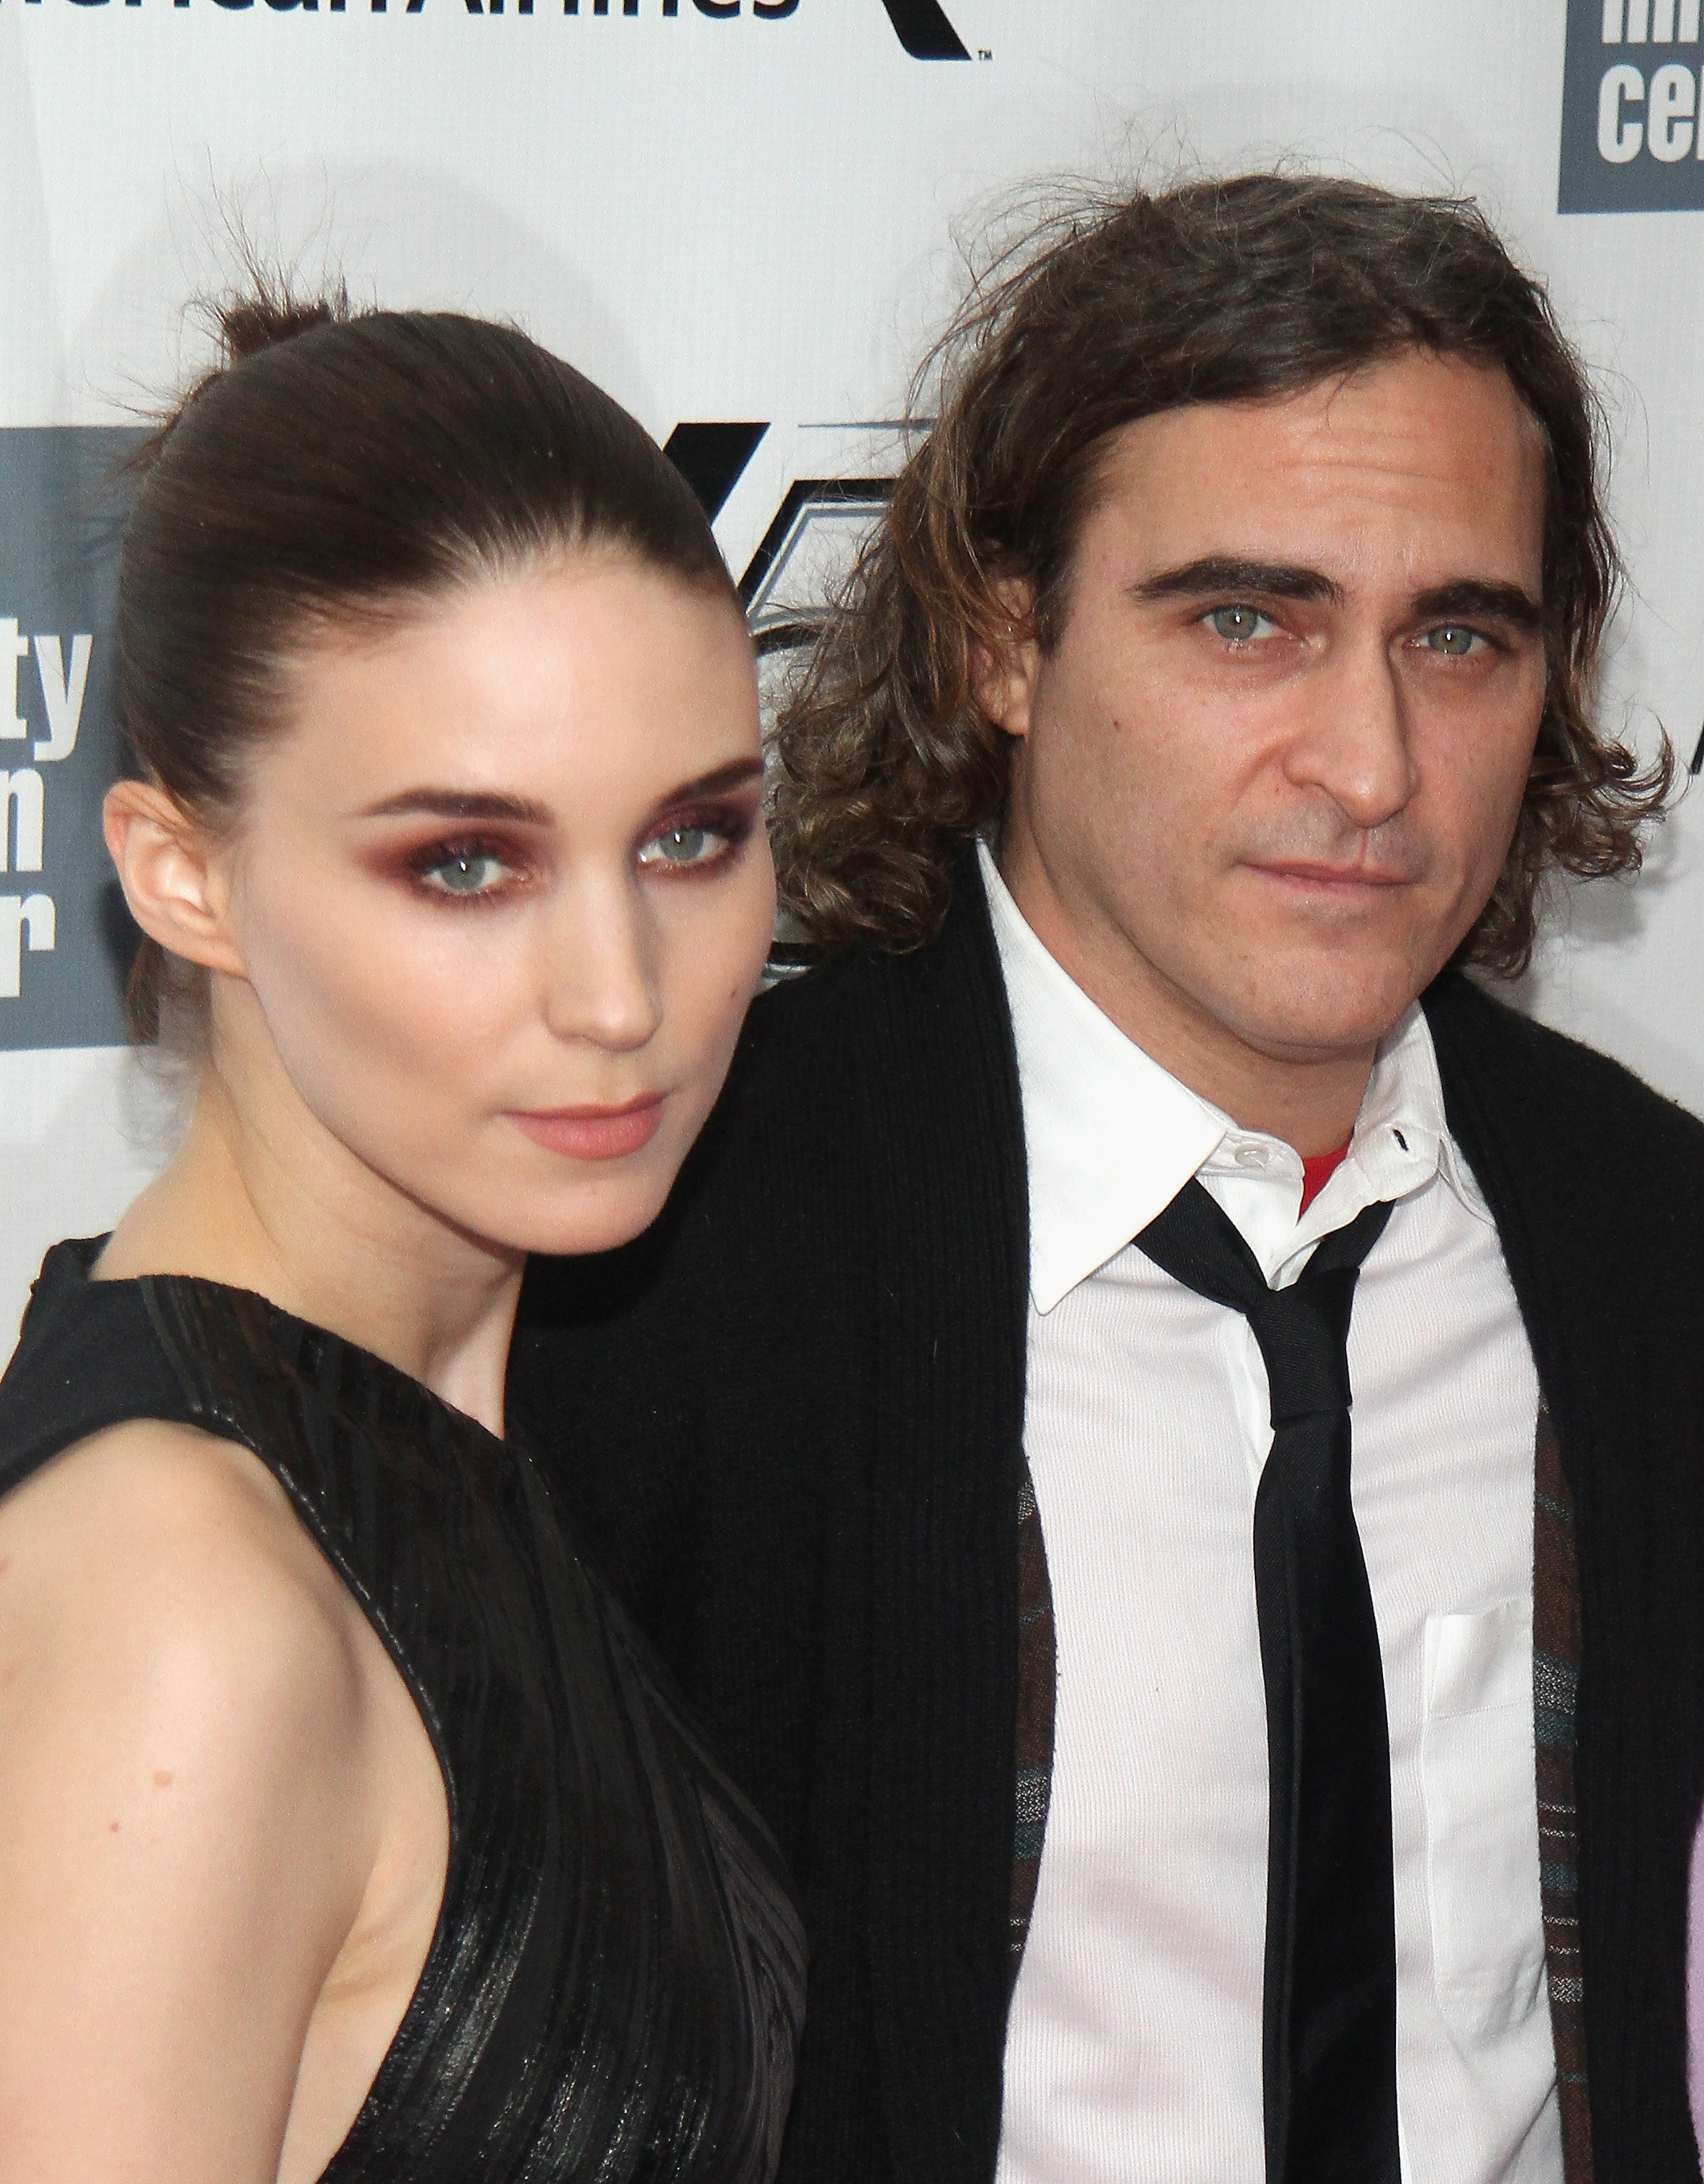 Mara and Phoenix at the New York Film Festival in 2013